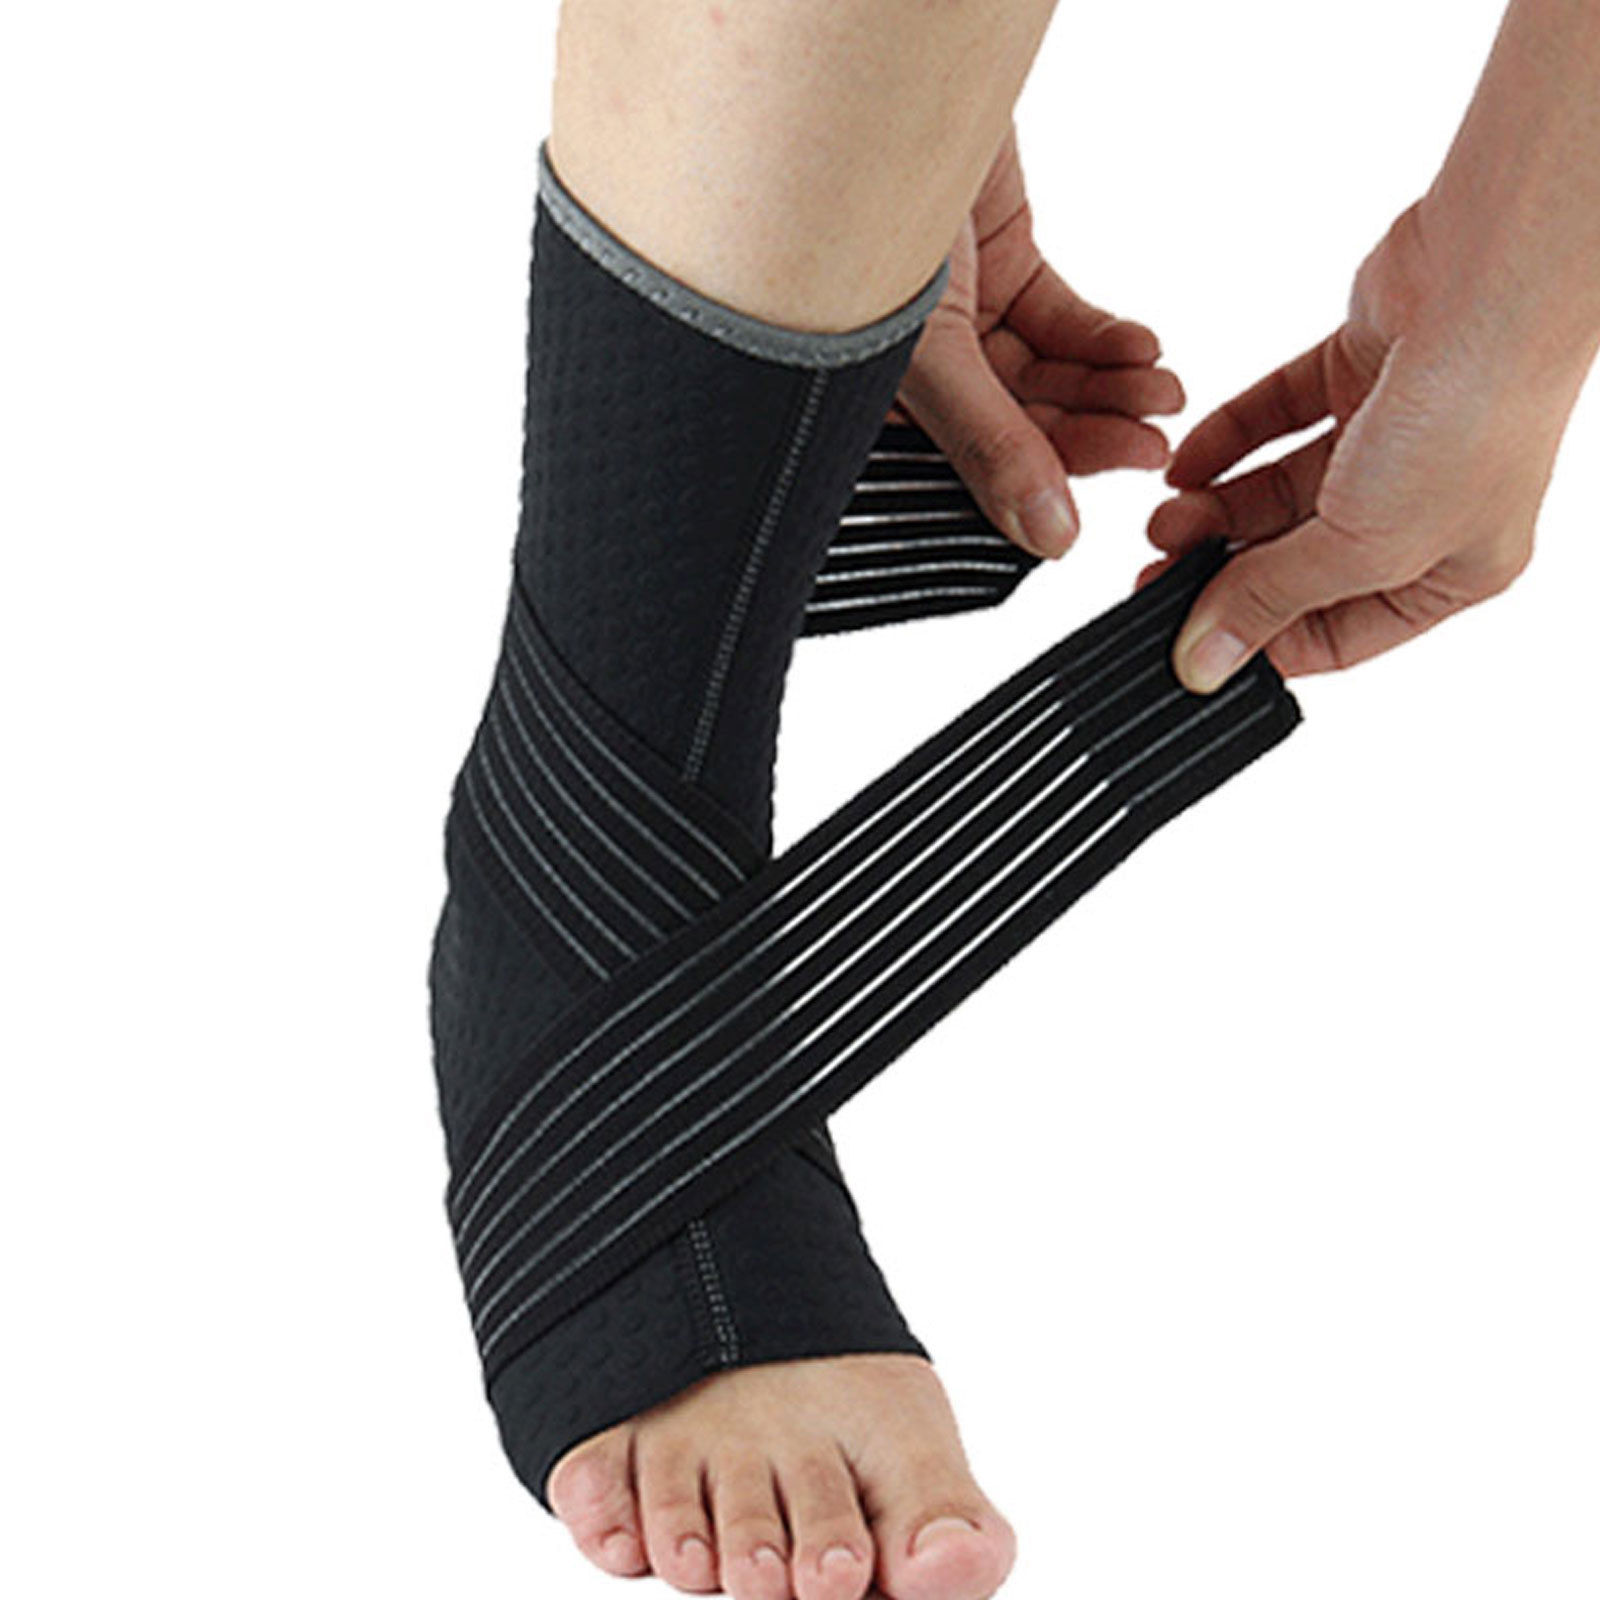 2x Ankle Support Brace Nuova Health